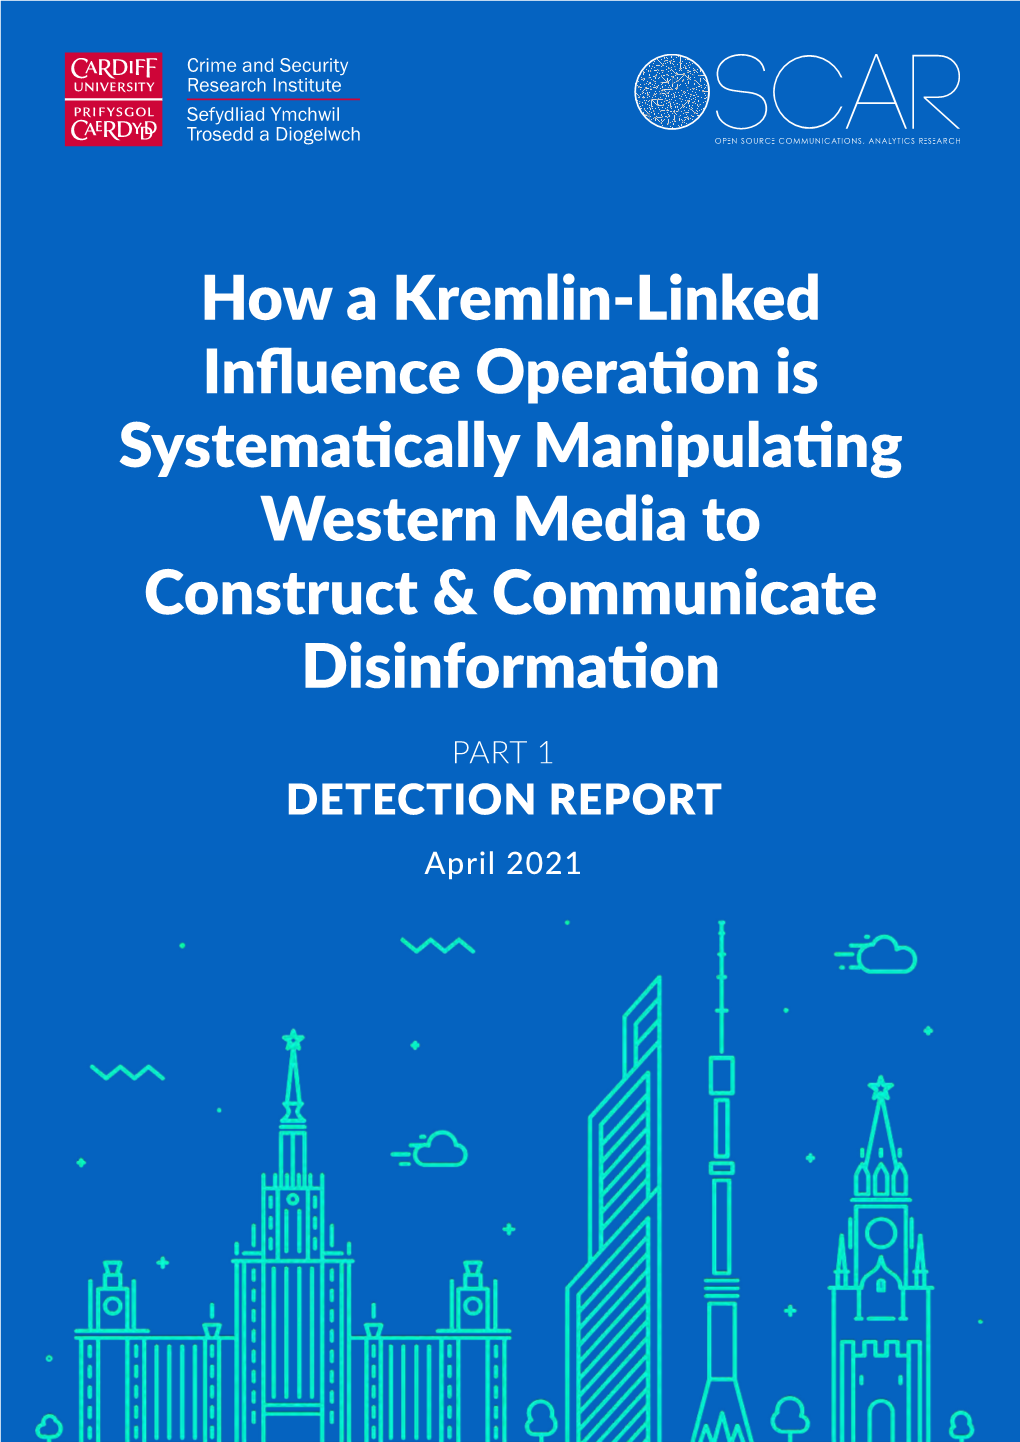 How a Kremlin-Linked Influence Operation Is Systematically Manipulating Western Media to Construct & Communicate Disinformation PART 1 DETECTION REPORT April 2021